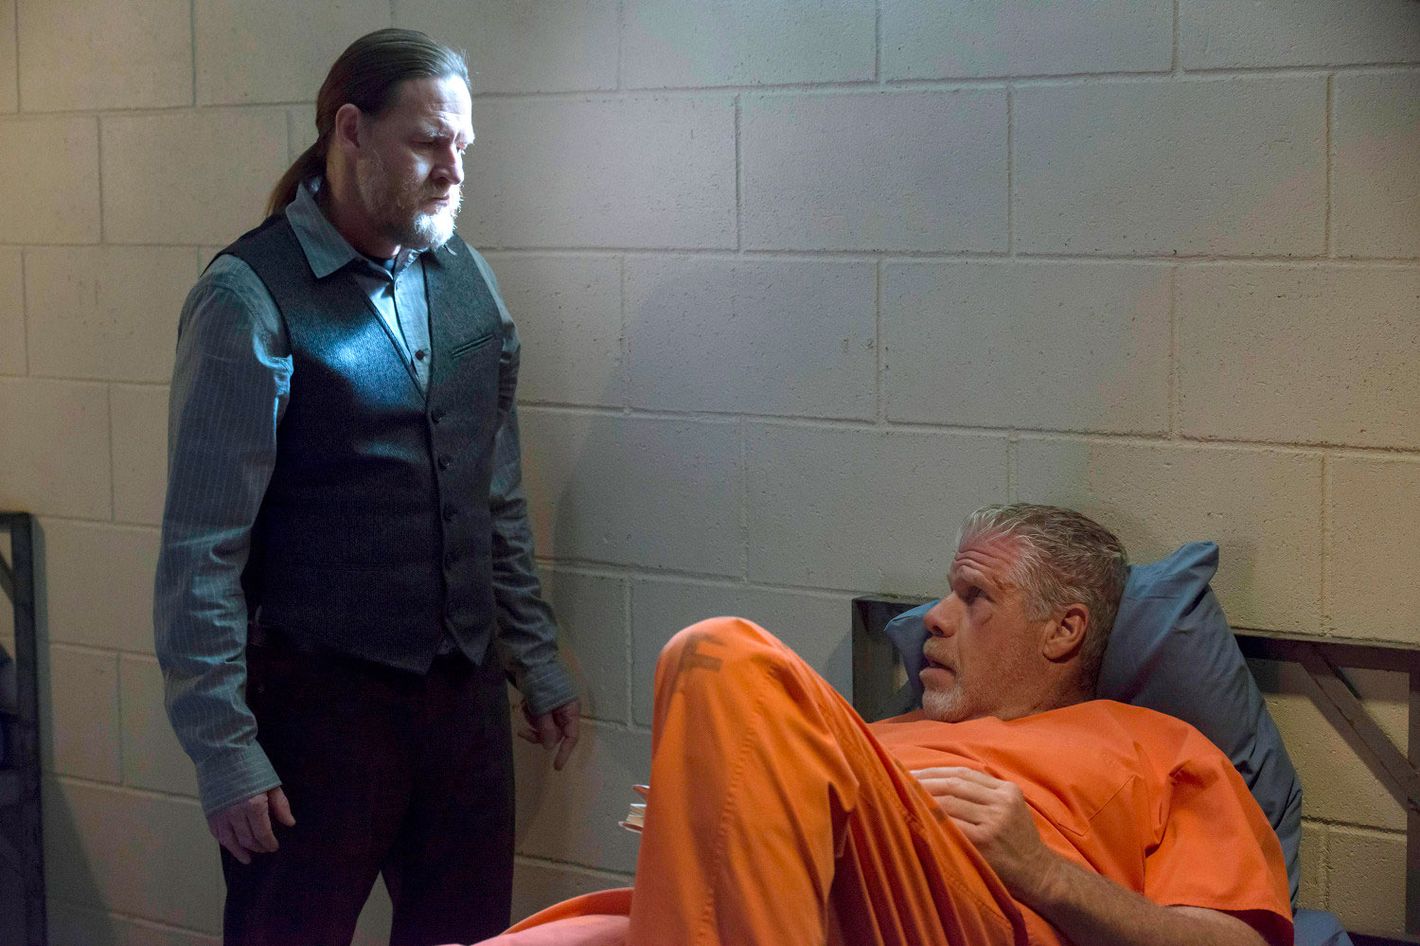 Granny With Boy - Sons of Anarchy Recap: An Unexpected Shooting